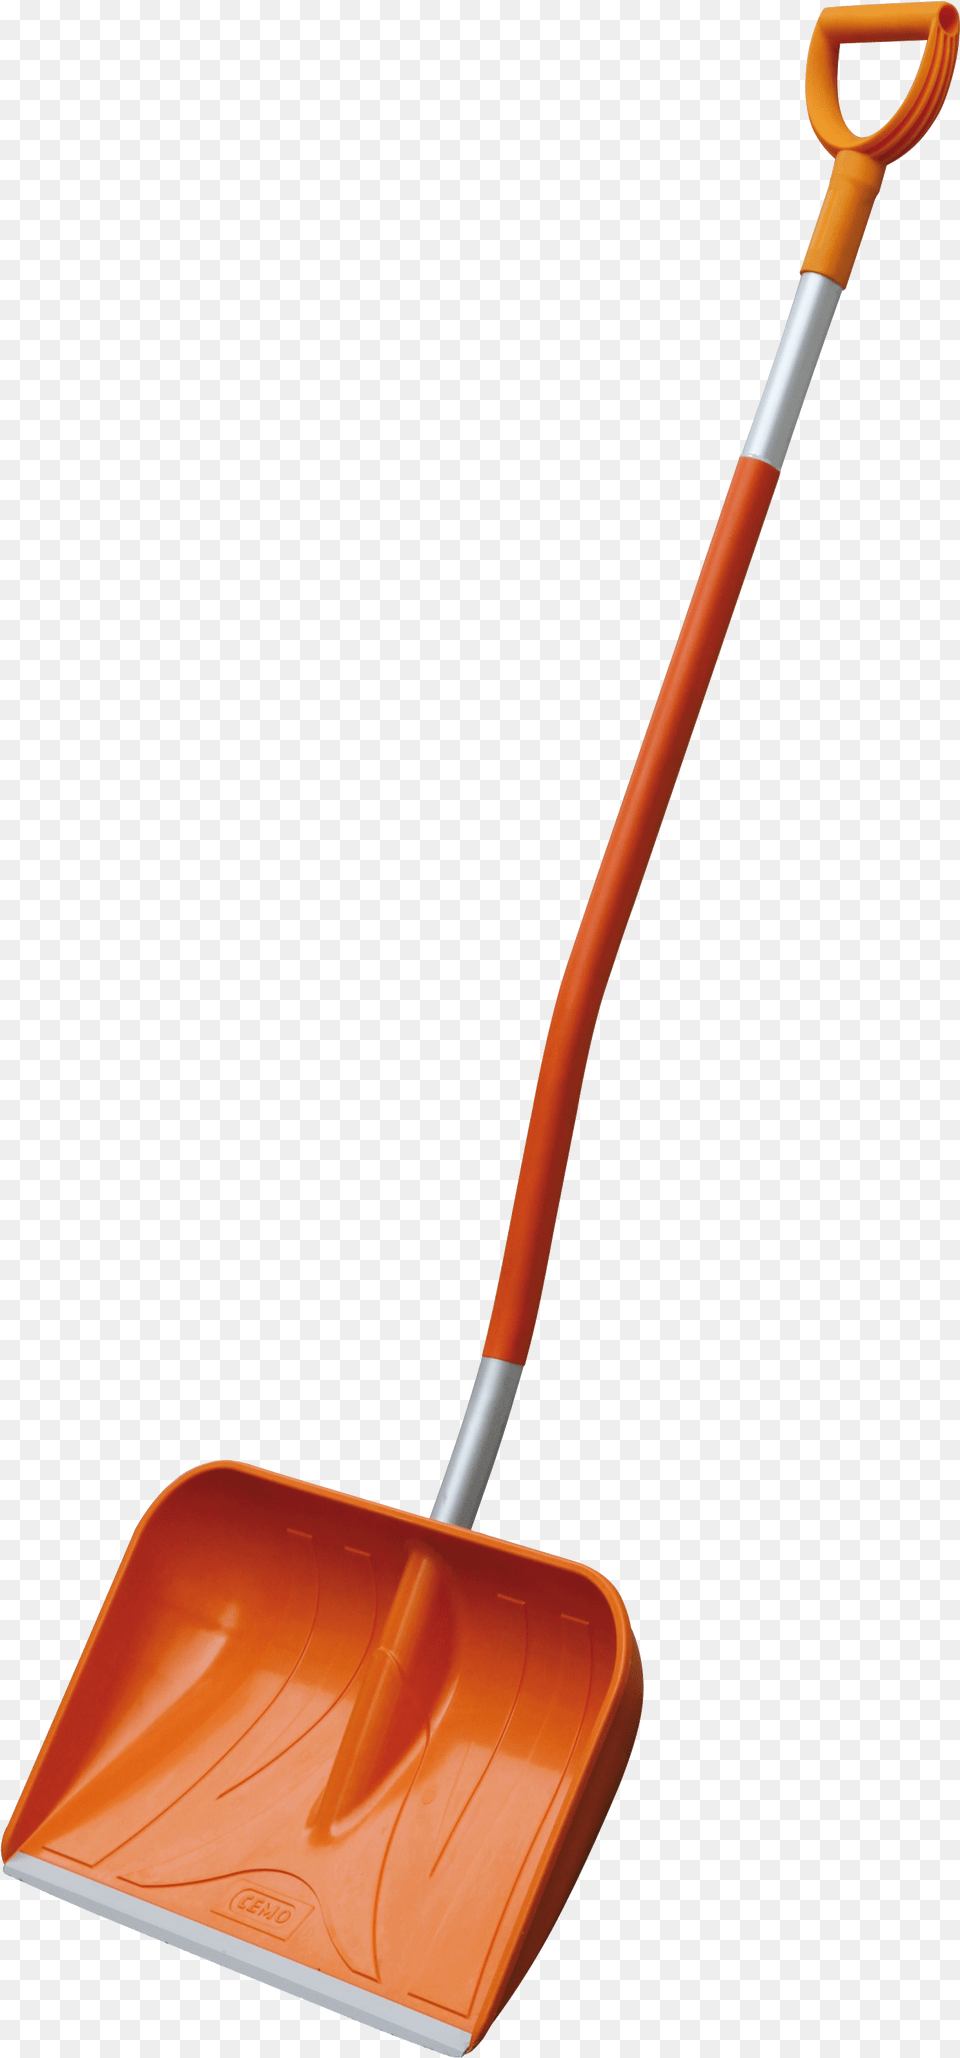 Snow Shovel Cemo Made Of Gfk With Oval Handle And Aluminium, Device, Tool, Smoke Pipe Png